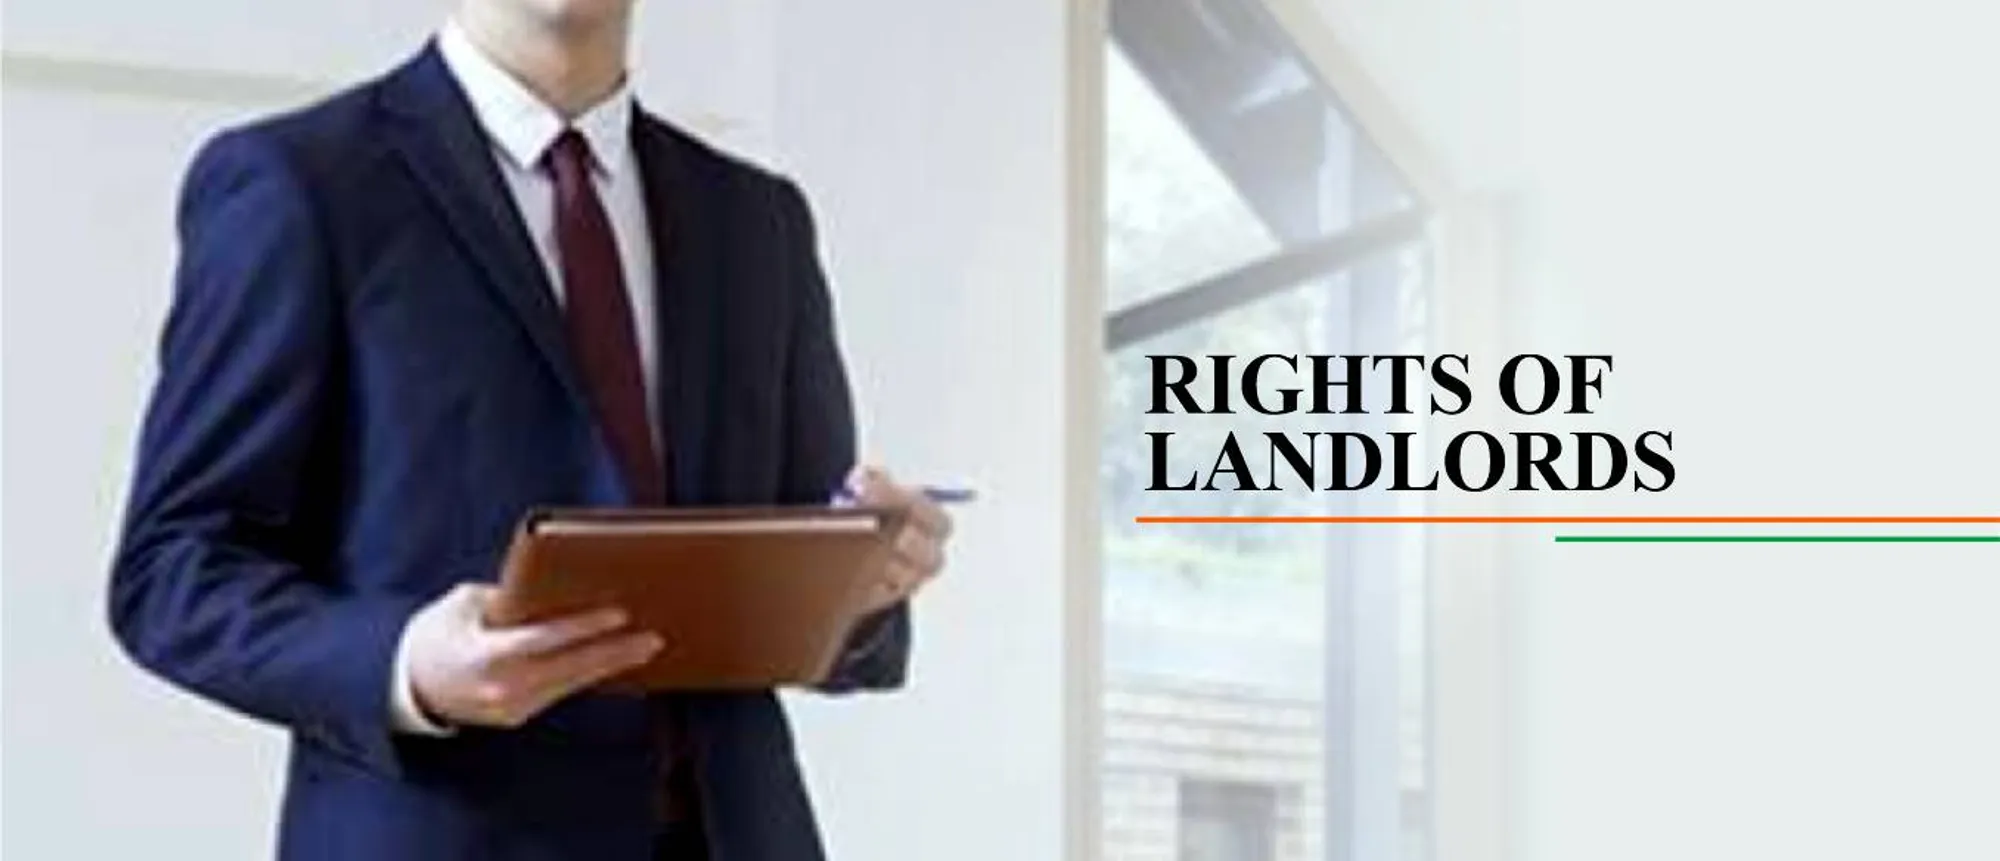 Rights of landlords in India